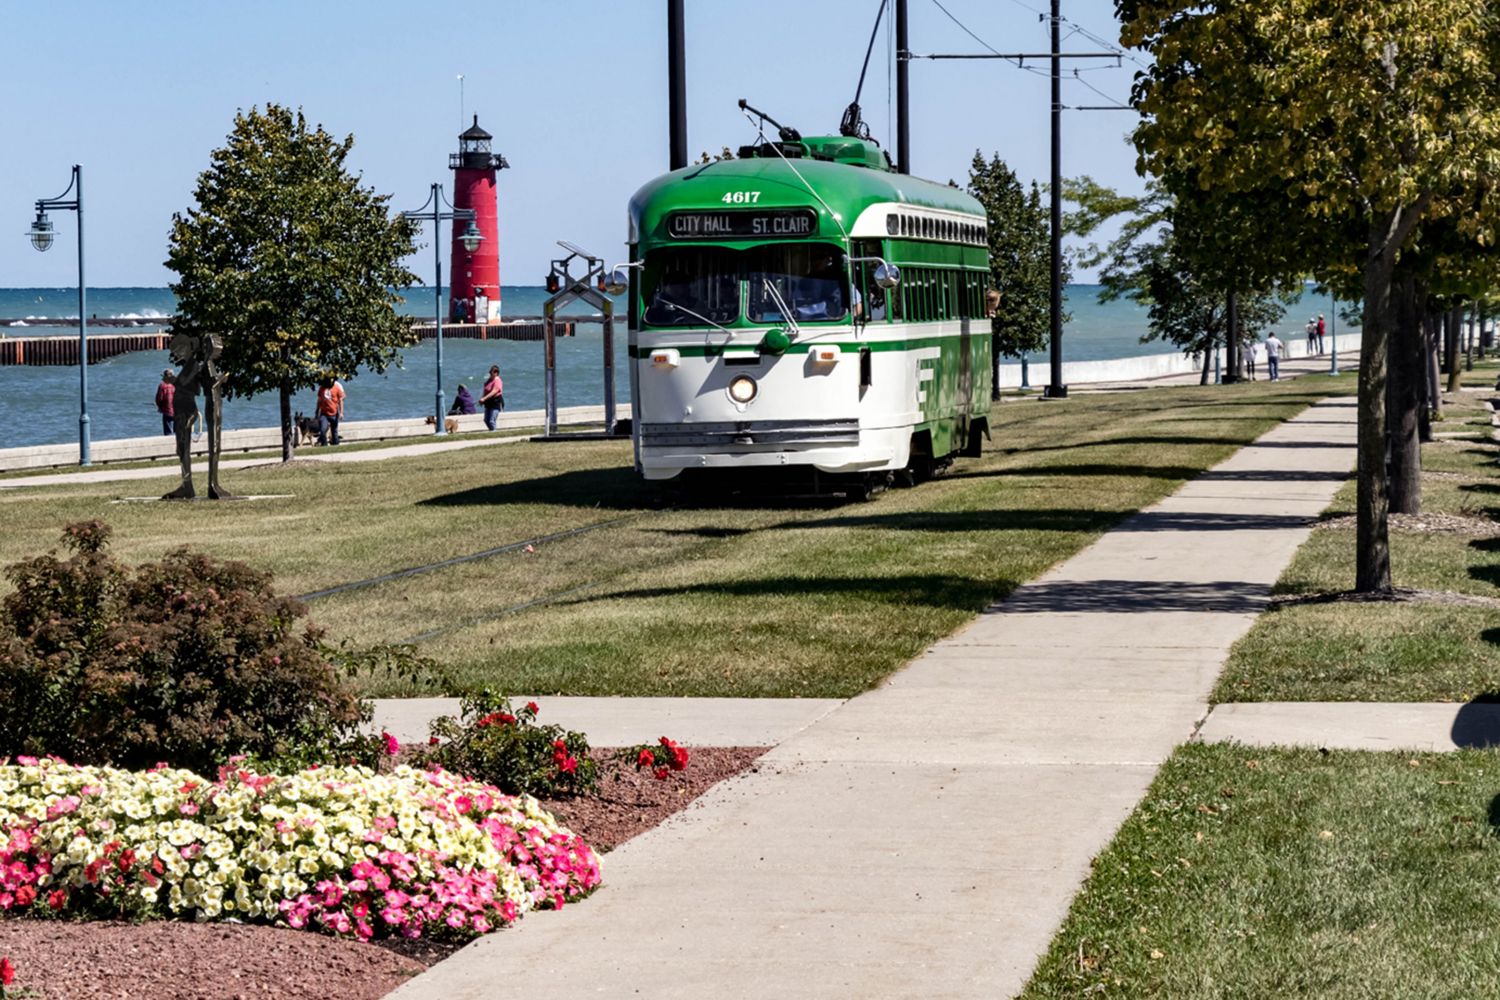 Electric streetcars are just one of the charming aspects of life in Kenosha, Wisconsin.